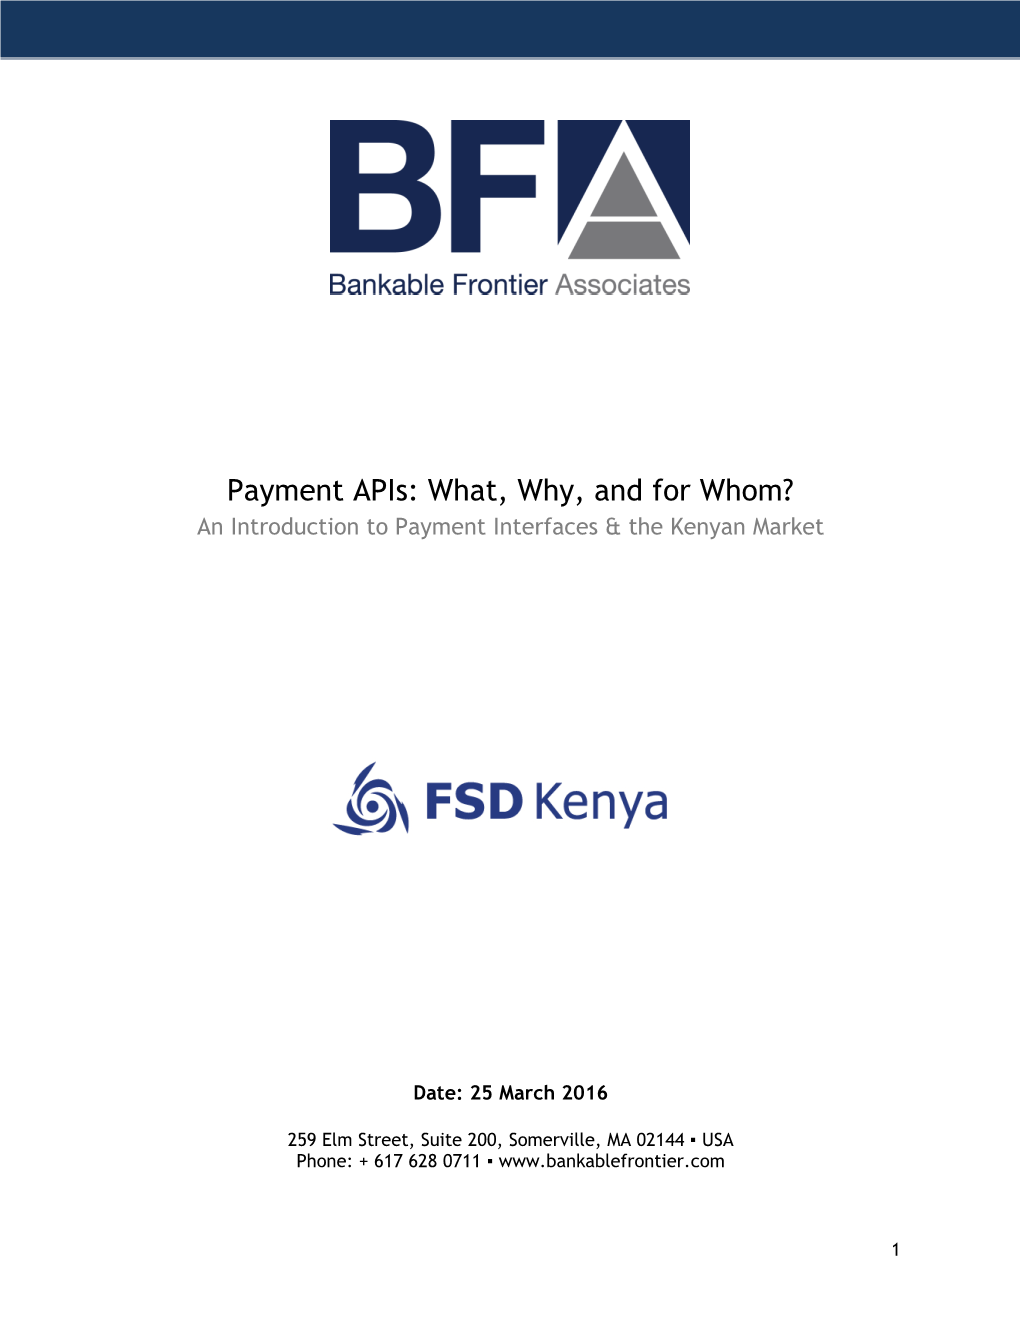 Payment Apis: What, Why, and for Whom? an Introduction to Payment Interfaces & the Kenyan Market